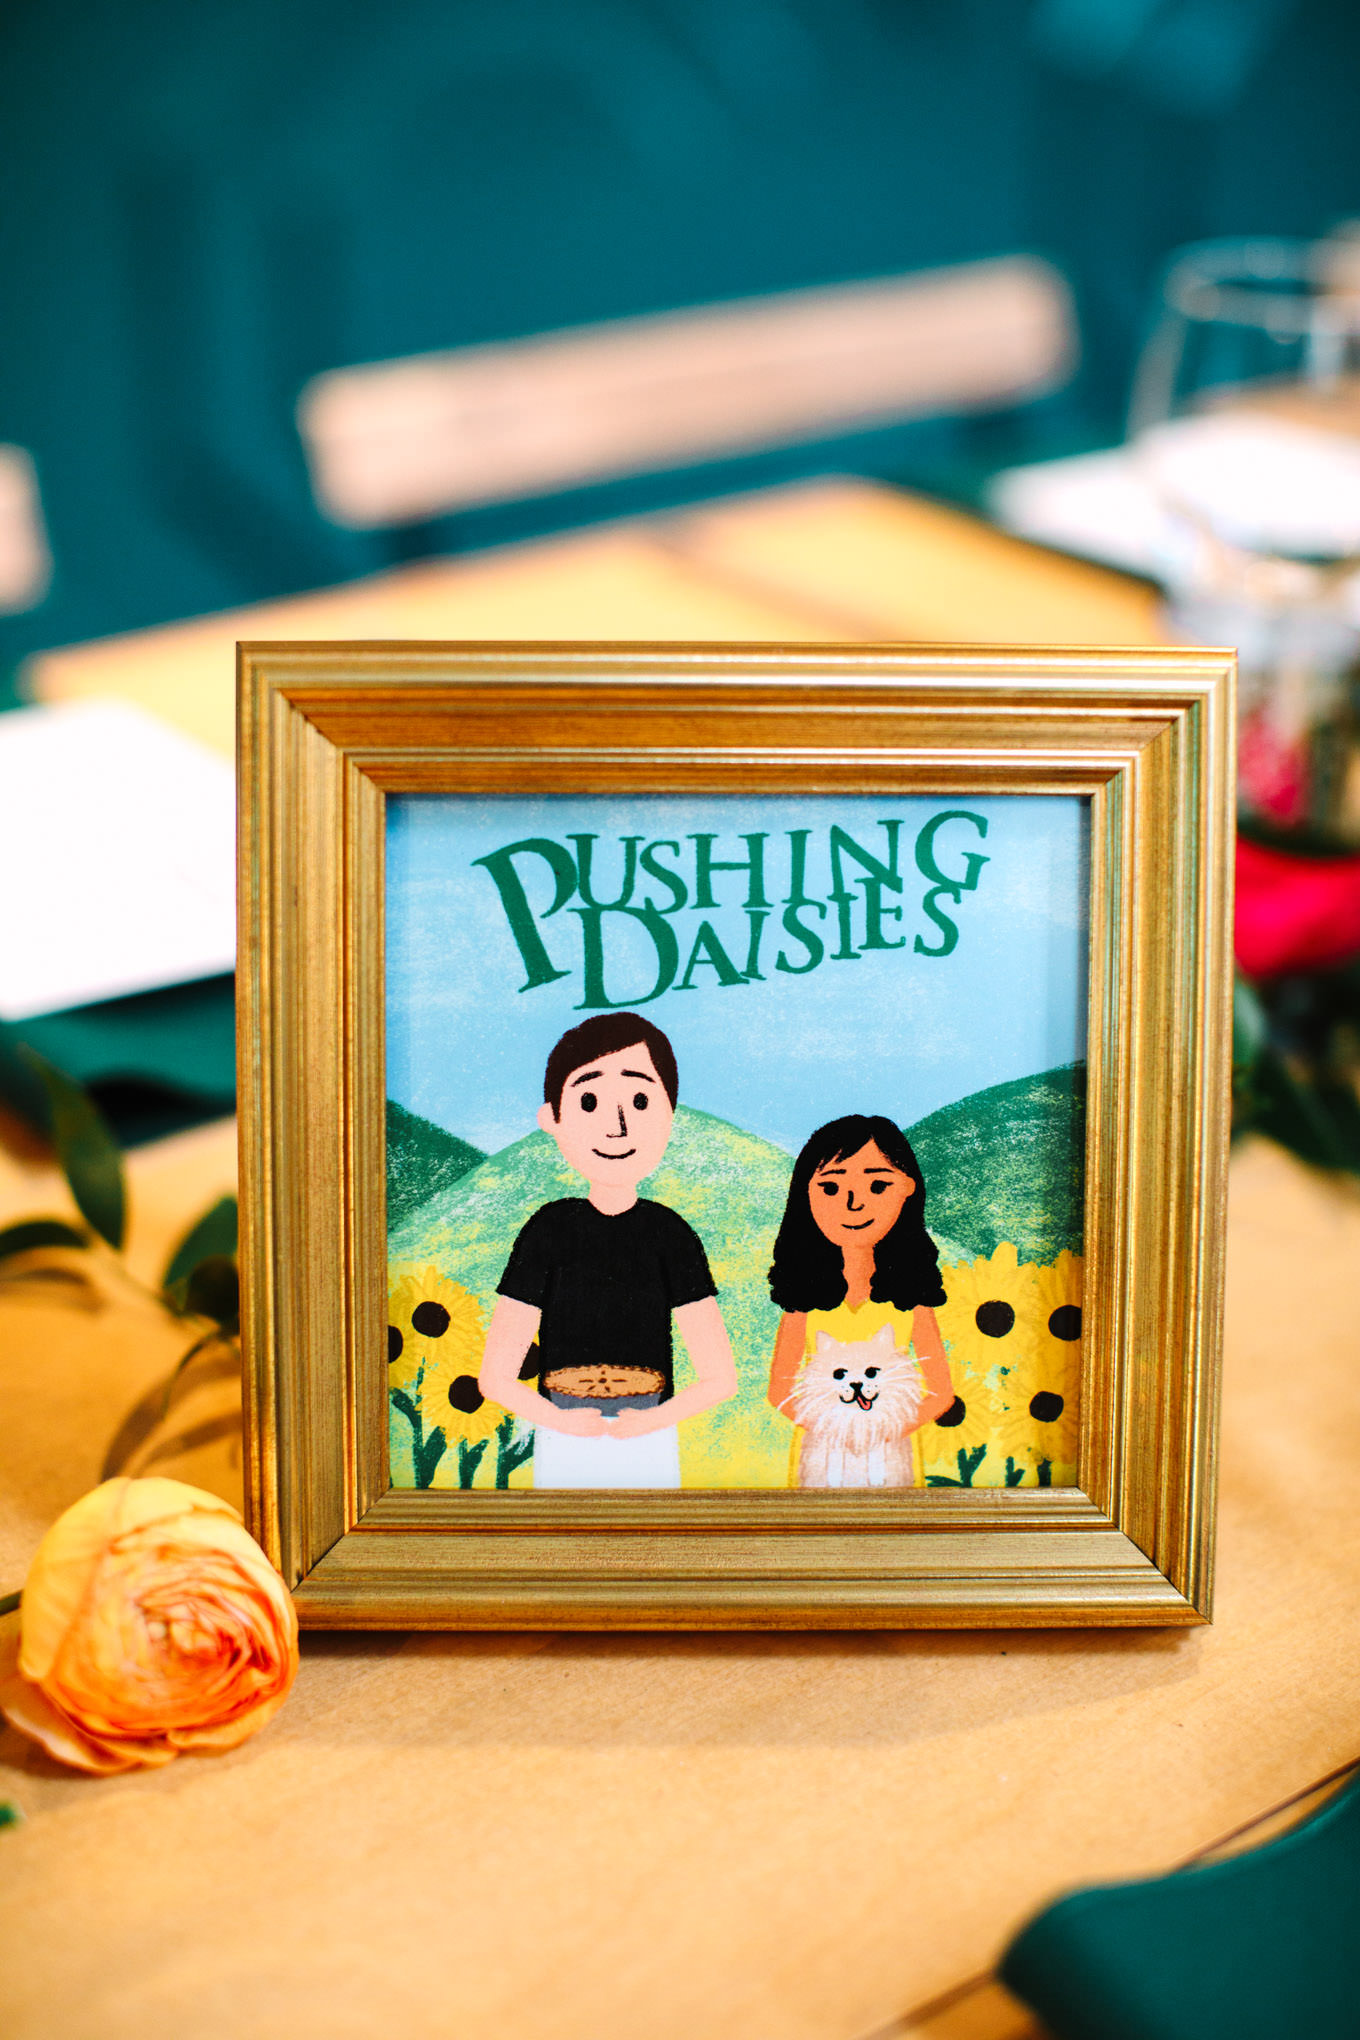 Pushing Daisies table illustration featuring the bride and groom | TV inspired wedding at The Fig House Los Angeles | Published on The Knot | Fresh and colorful photography for fun-loving couples in Southern California | #losangeleswedding #TVwedding #colorfulwedding #theknot   Source: Mary Costa Photography | Los Angeles wedding photographer